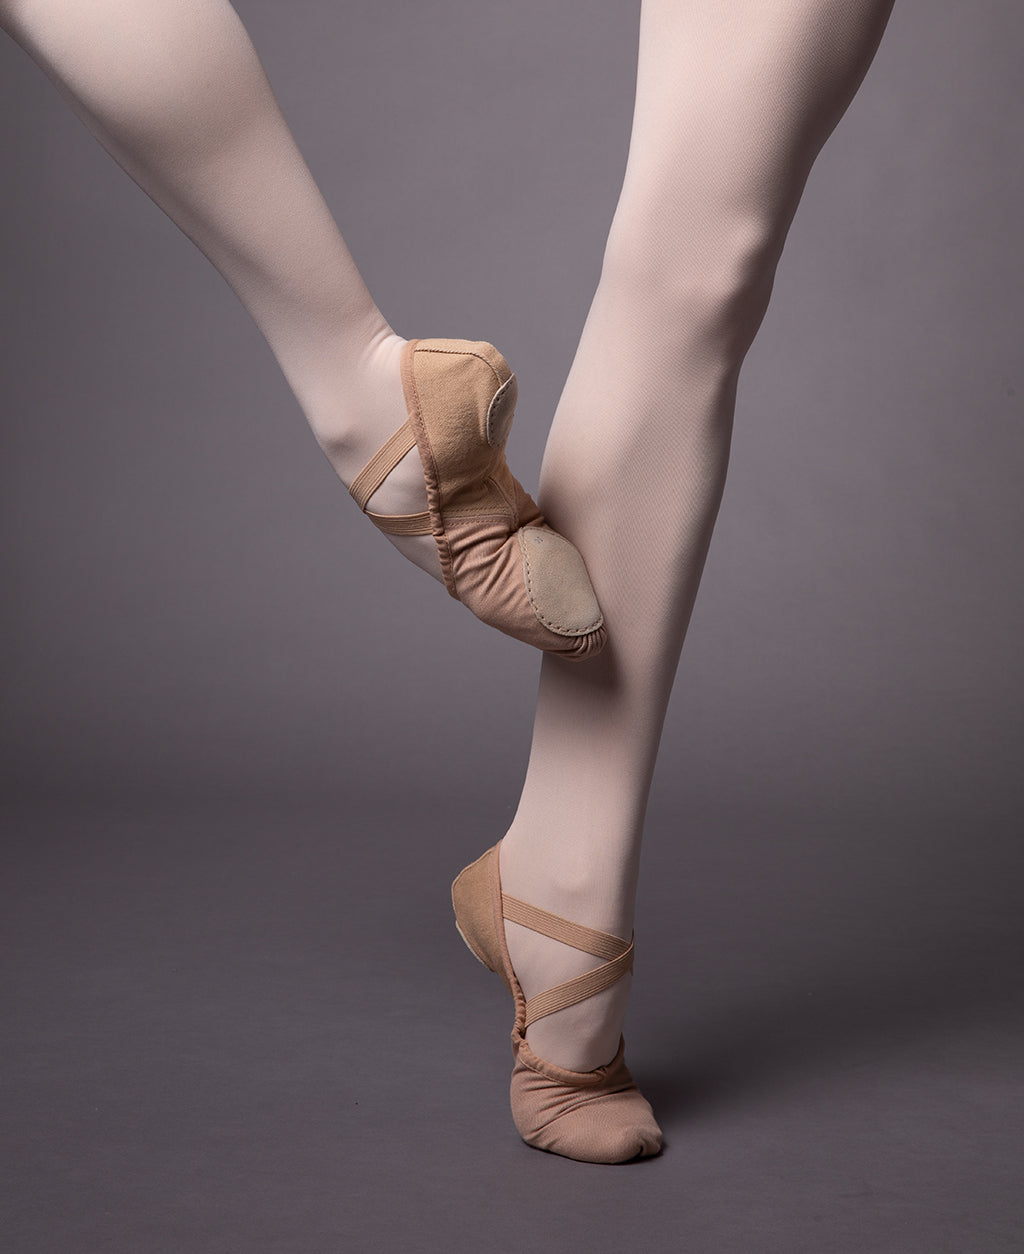 The legs of a dancer wearing the Perfectus ballet flat and pink dance tights 